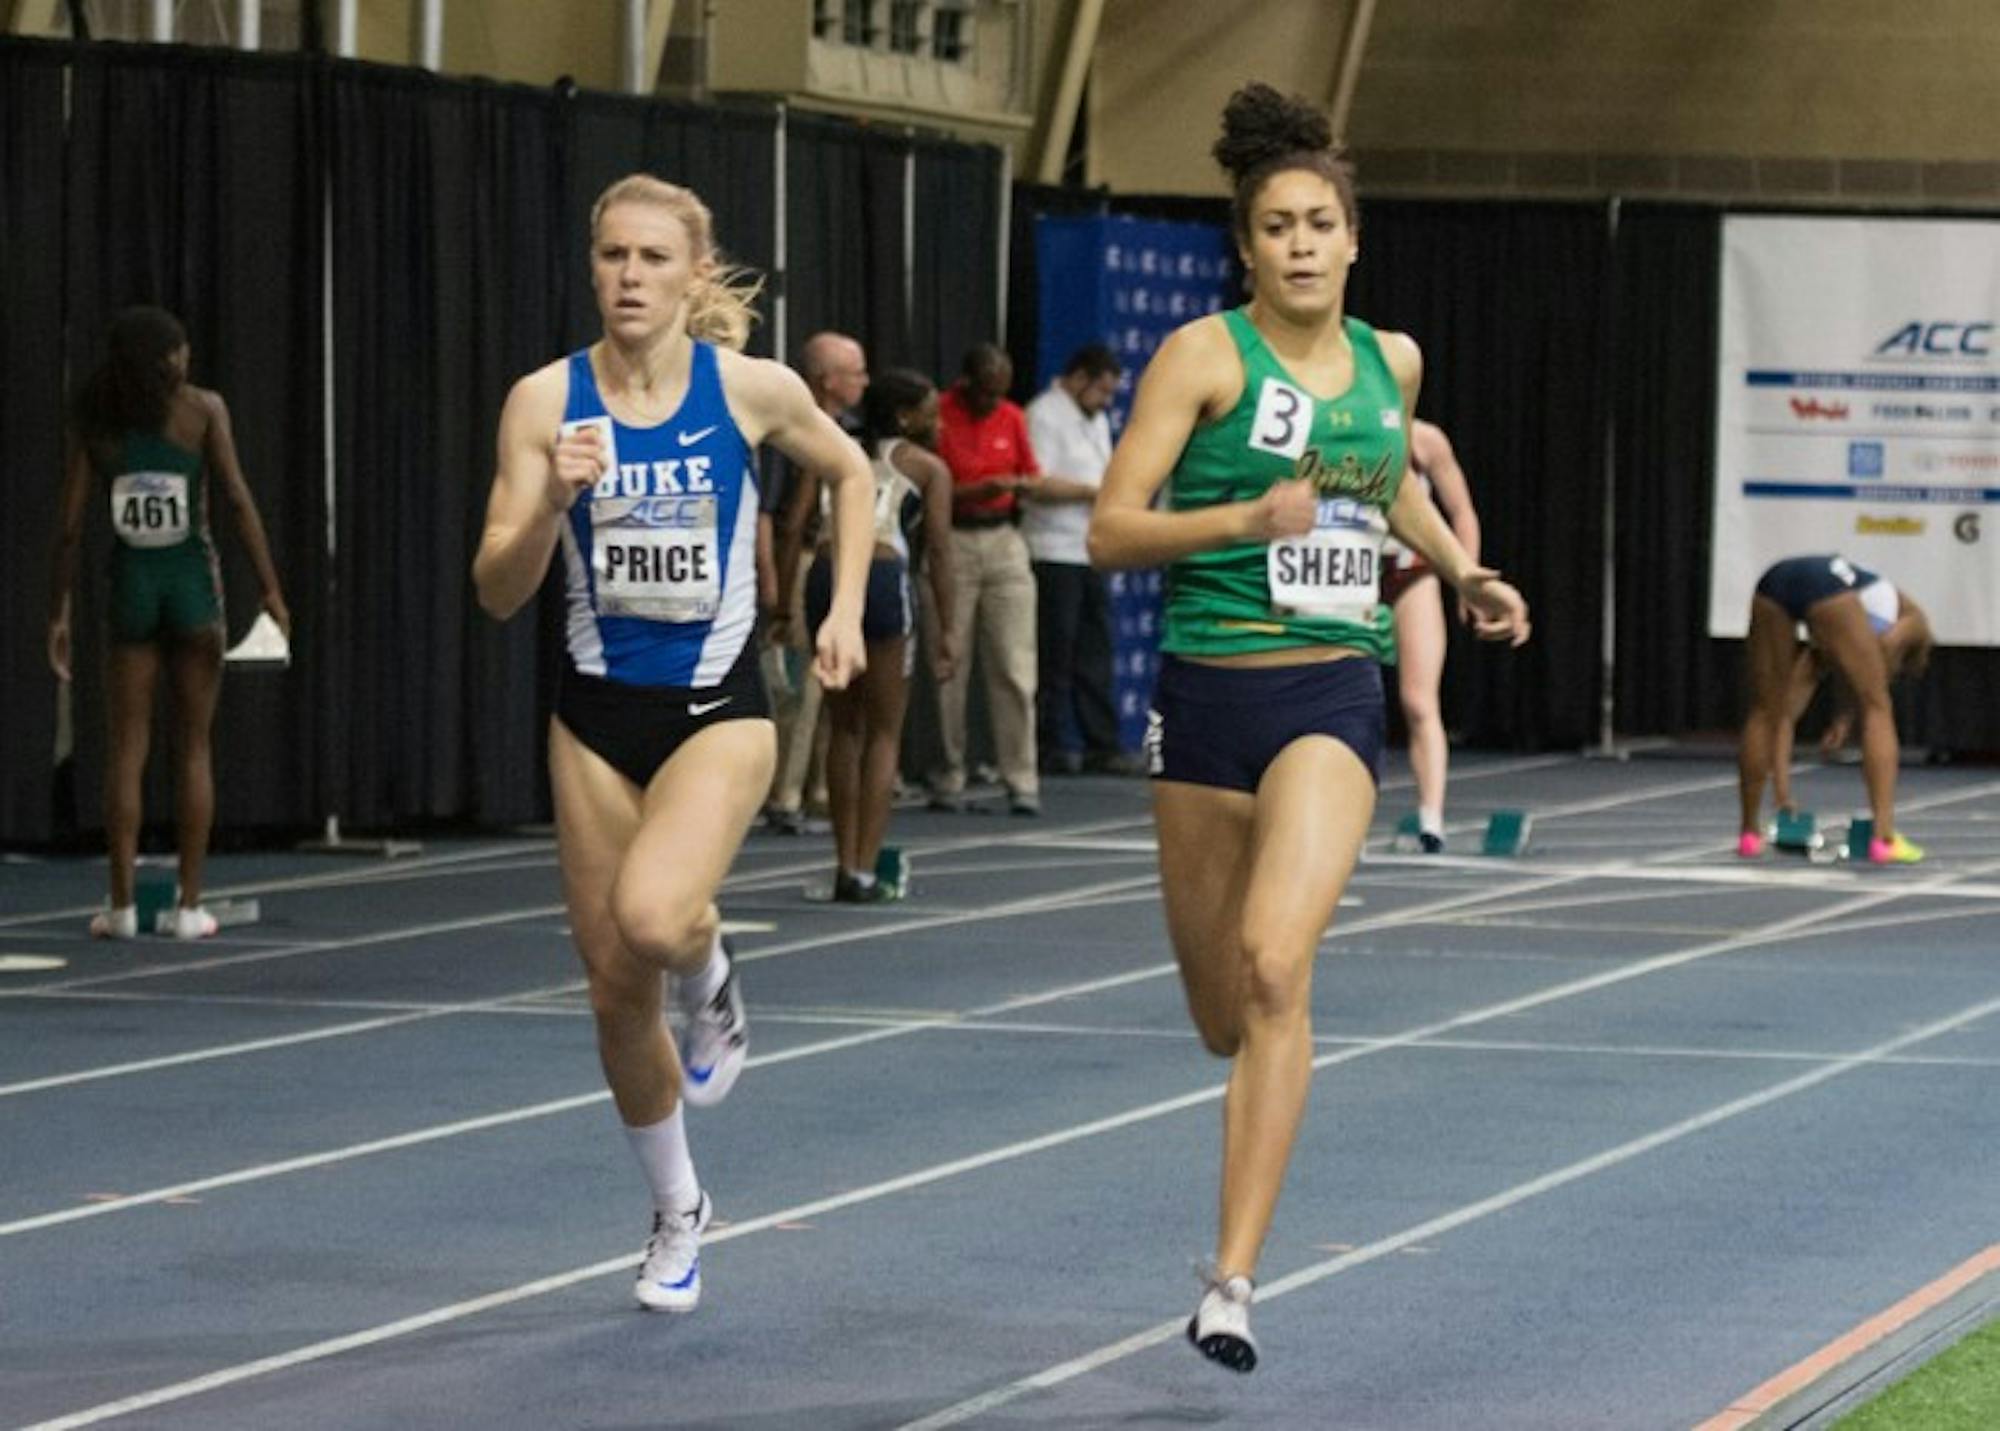 Irish junior Jordan Shead competes in the 400-meter race during the ACC indoor championships at Loftus Sports Center on Feb. 24.